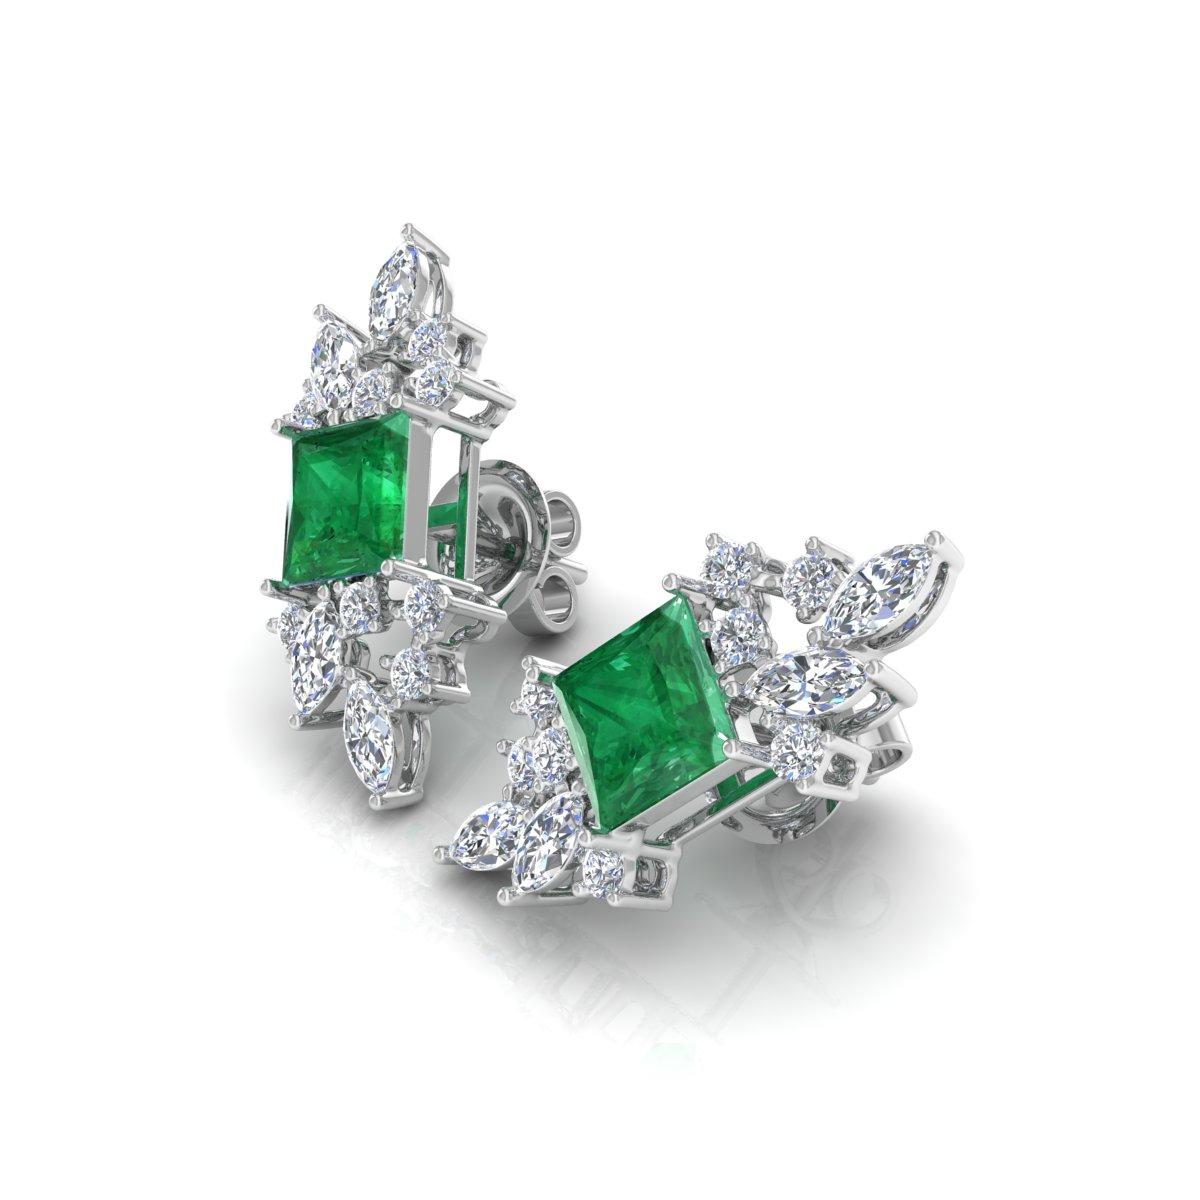 Asscher Cut Natural Emerald Gemstone Stud Earrings Diamond Solid 14k White Gold Fine Jewelry For Sale